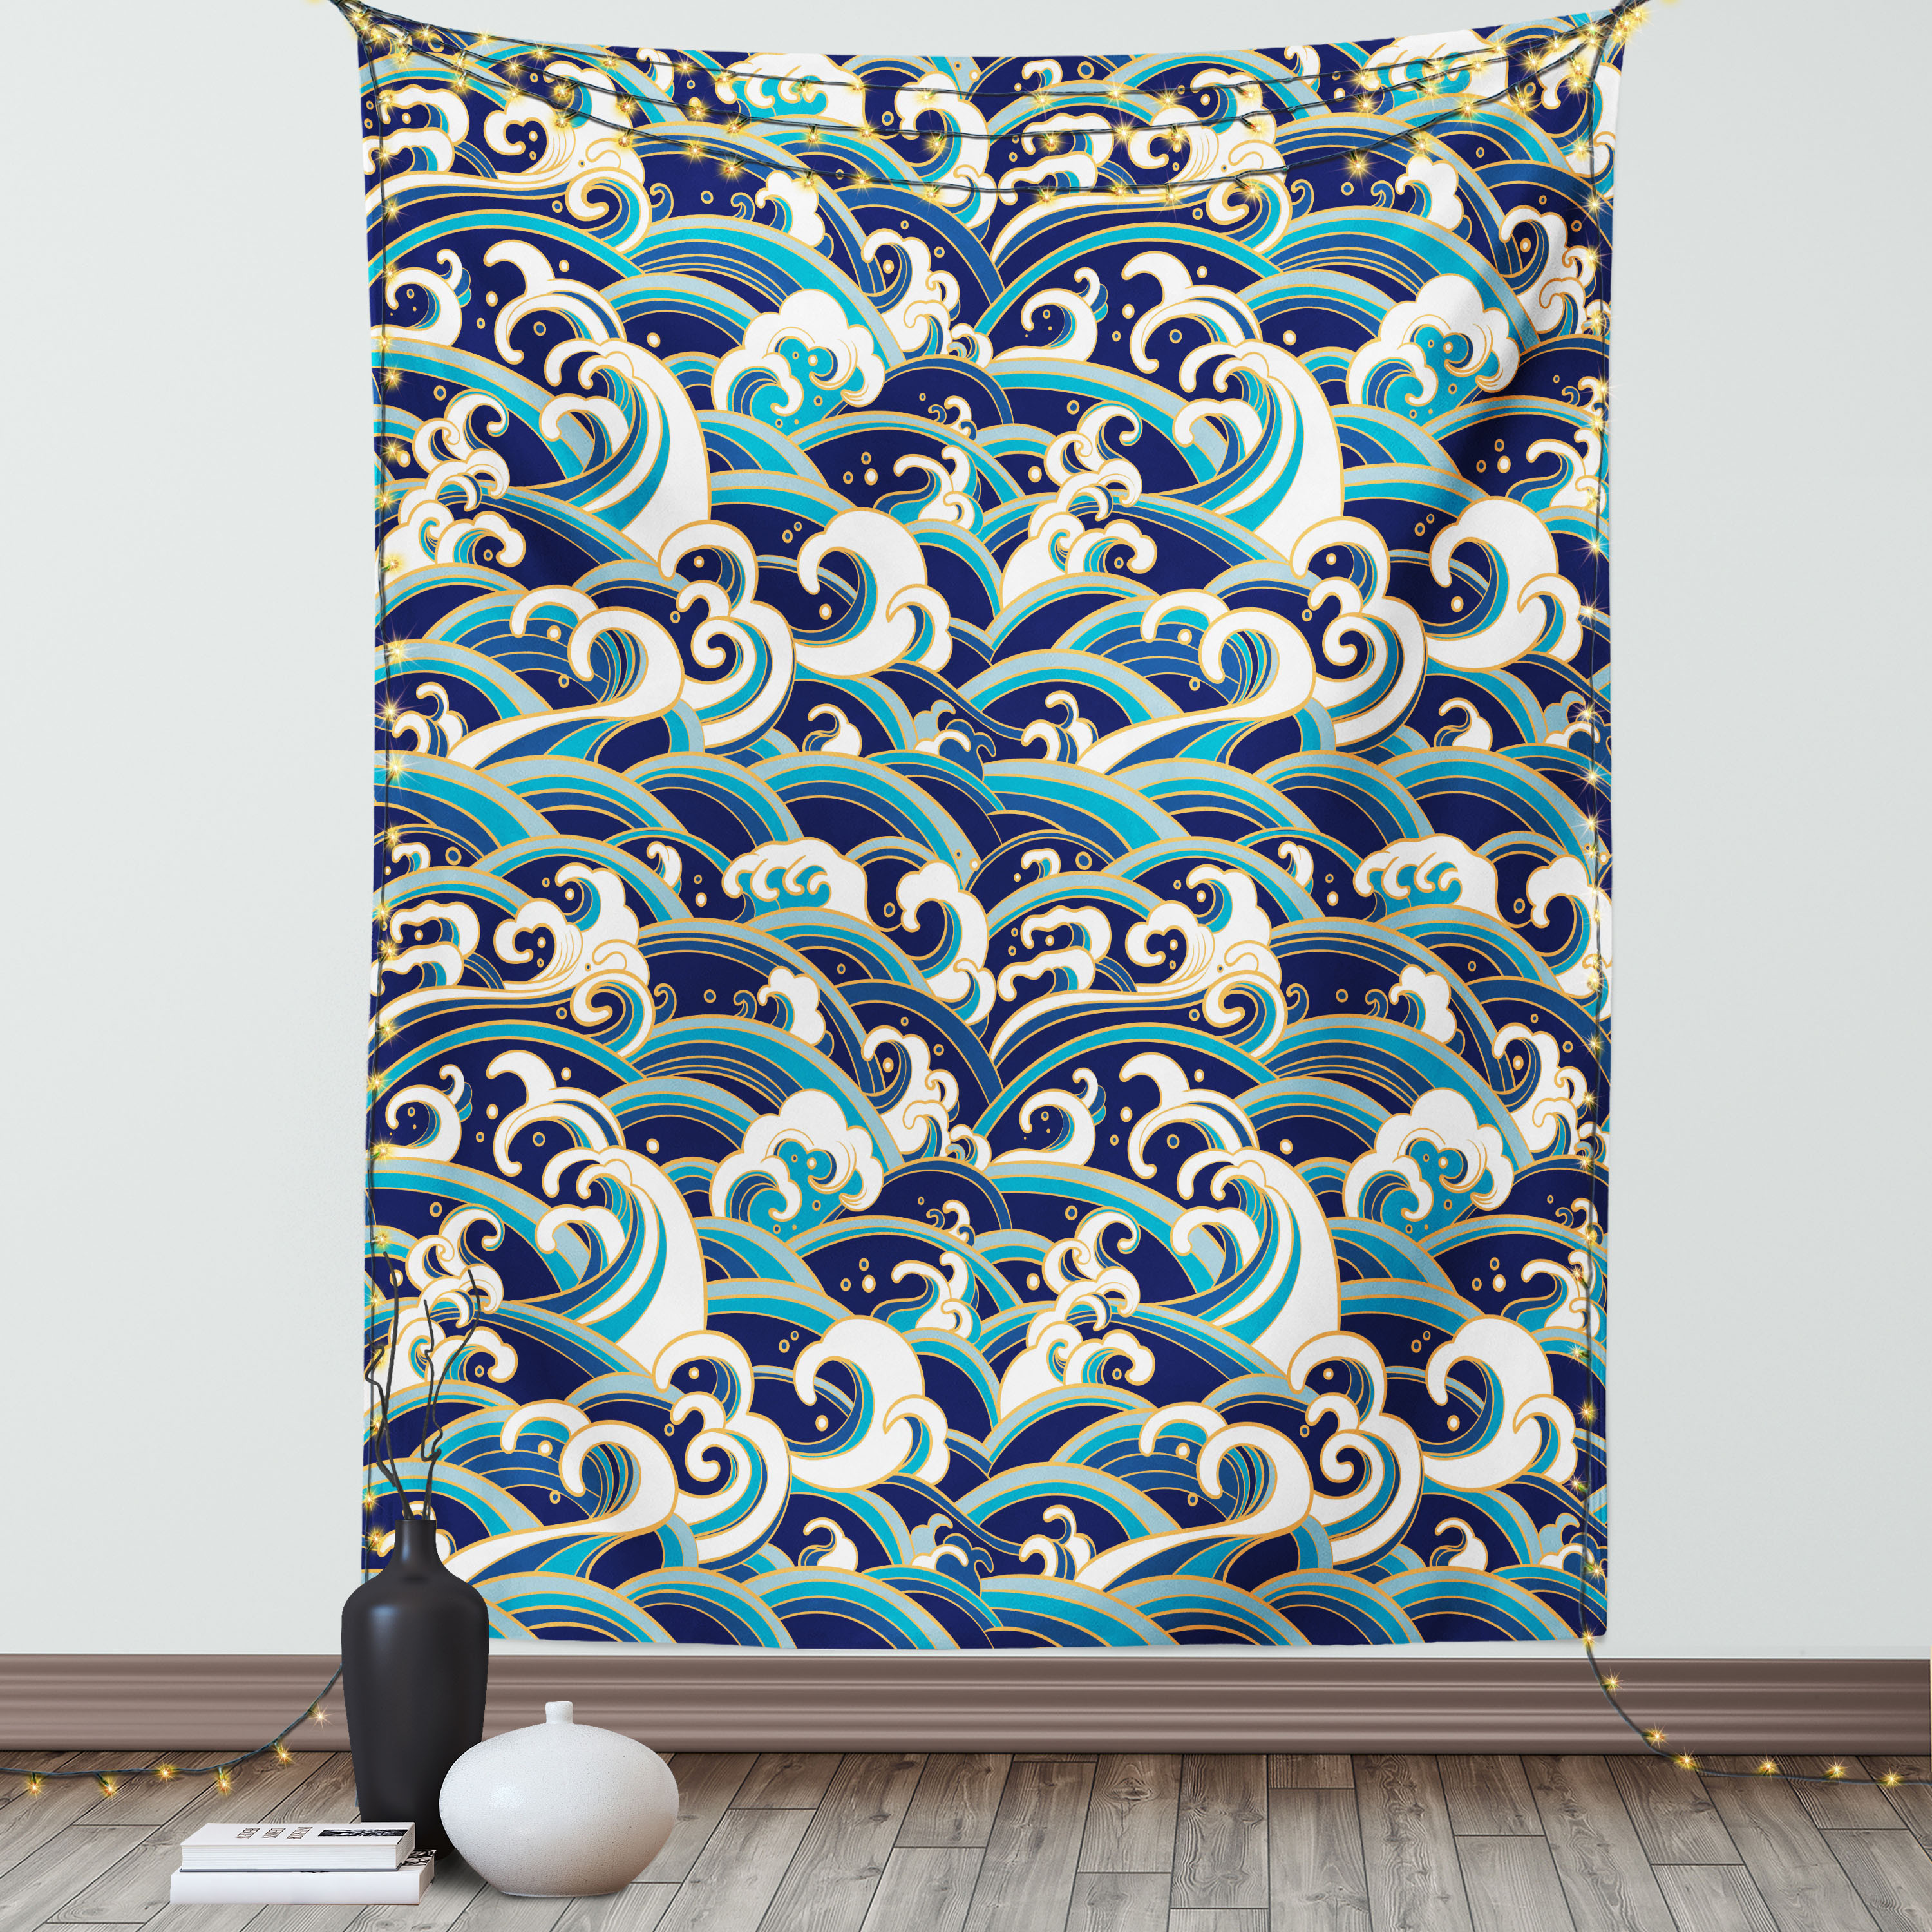 Nautical Tapestry, Traditional Oriental Style Ocean Waves Pattern with Foam and Splashes Print, Wall Hanging for Bedroom Living Room Dorm Decor, 40W X 60L Inches, Blue and White, by Ambesonne - image 1 of 5